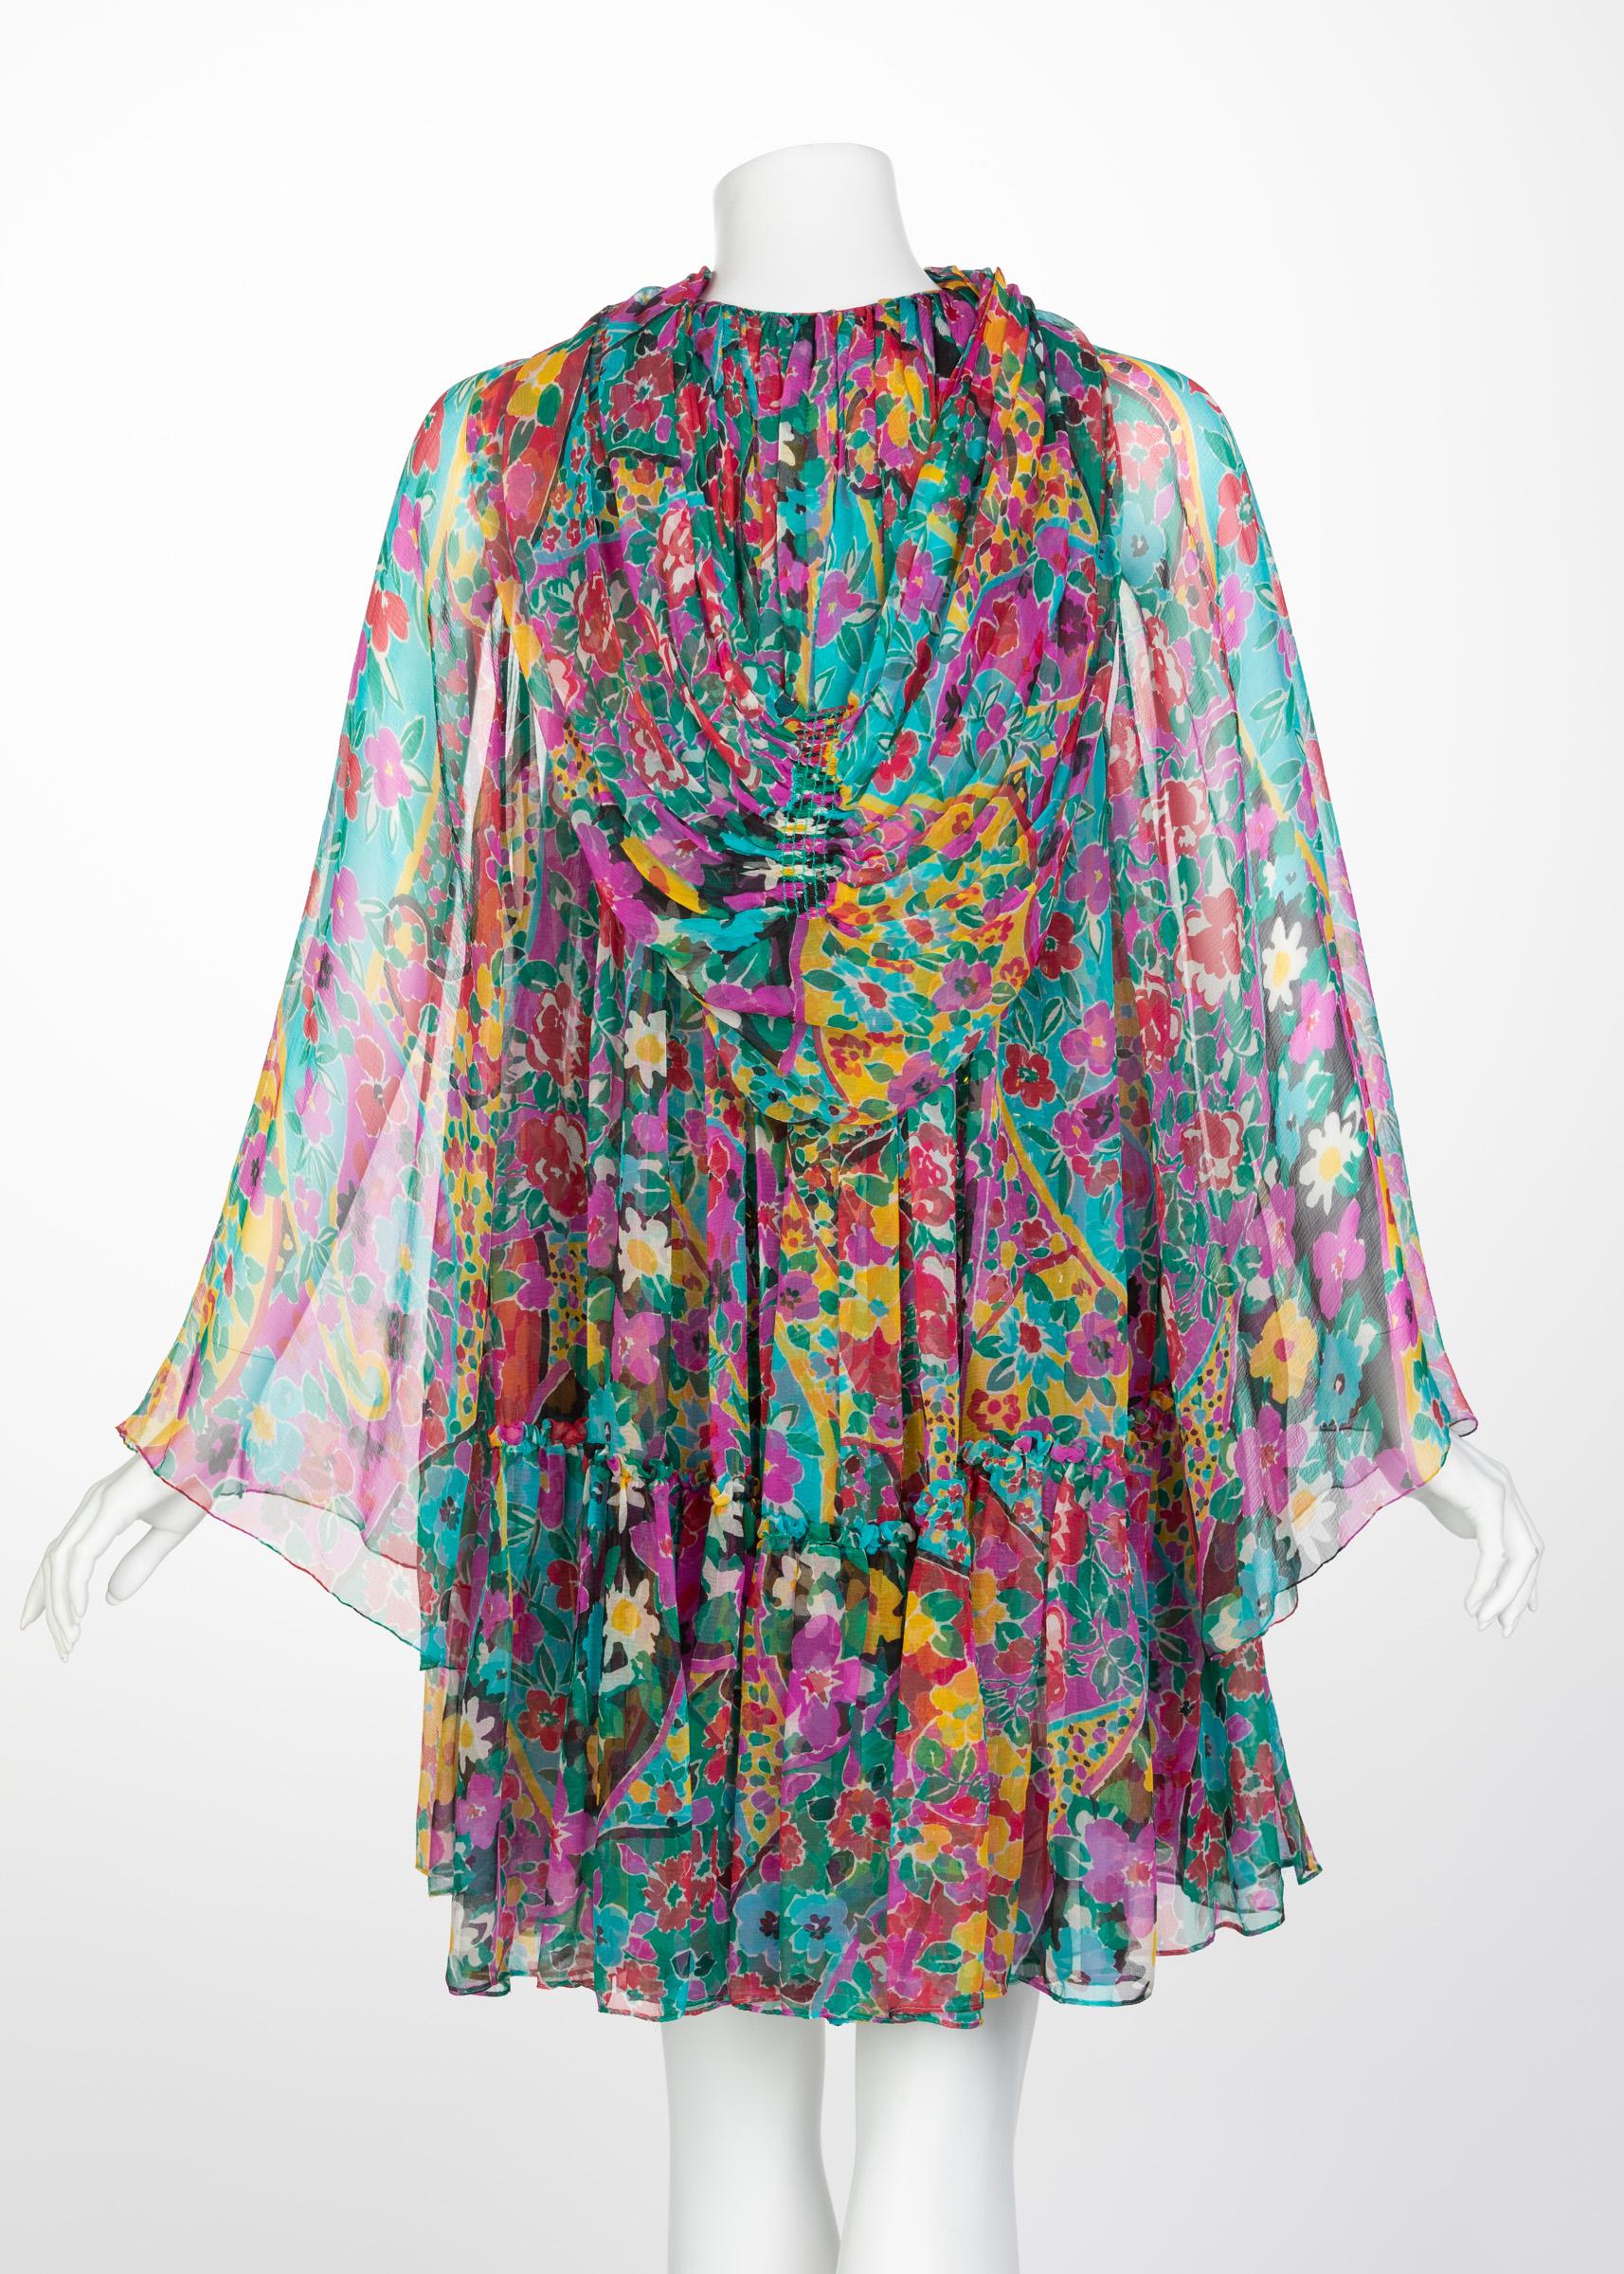 James Galanos Couture Beaded Floral Silk Mini Dress with Hooded Opera Coat, 1970 1